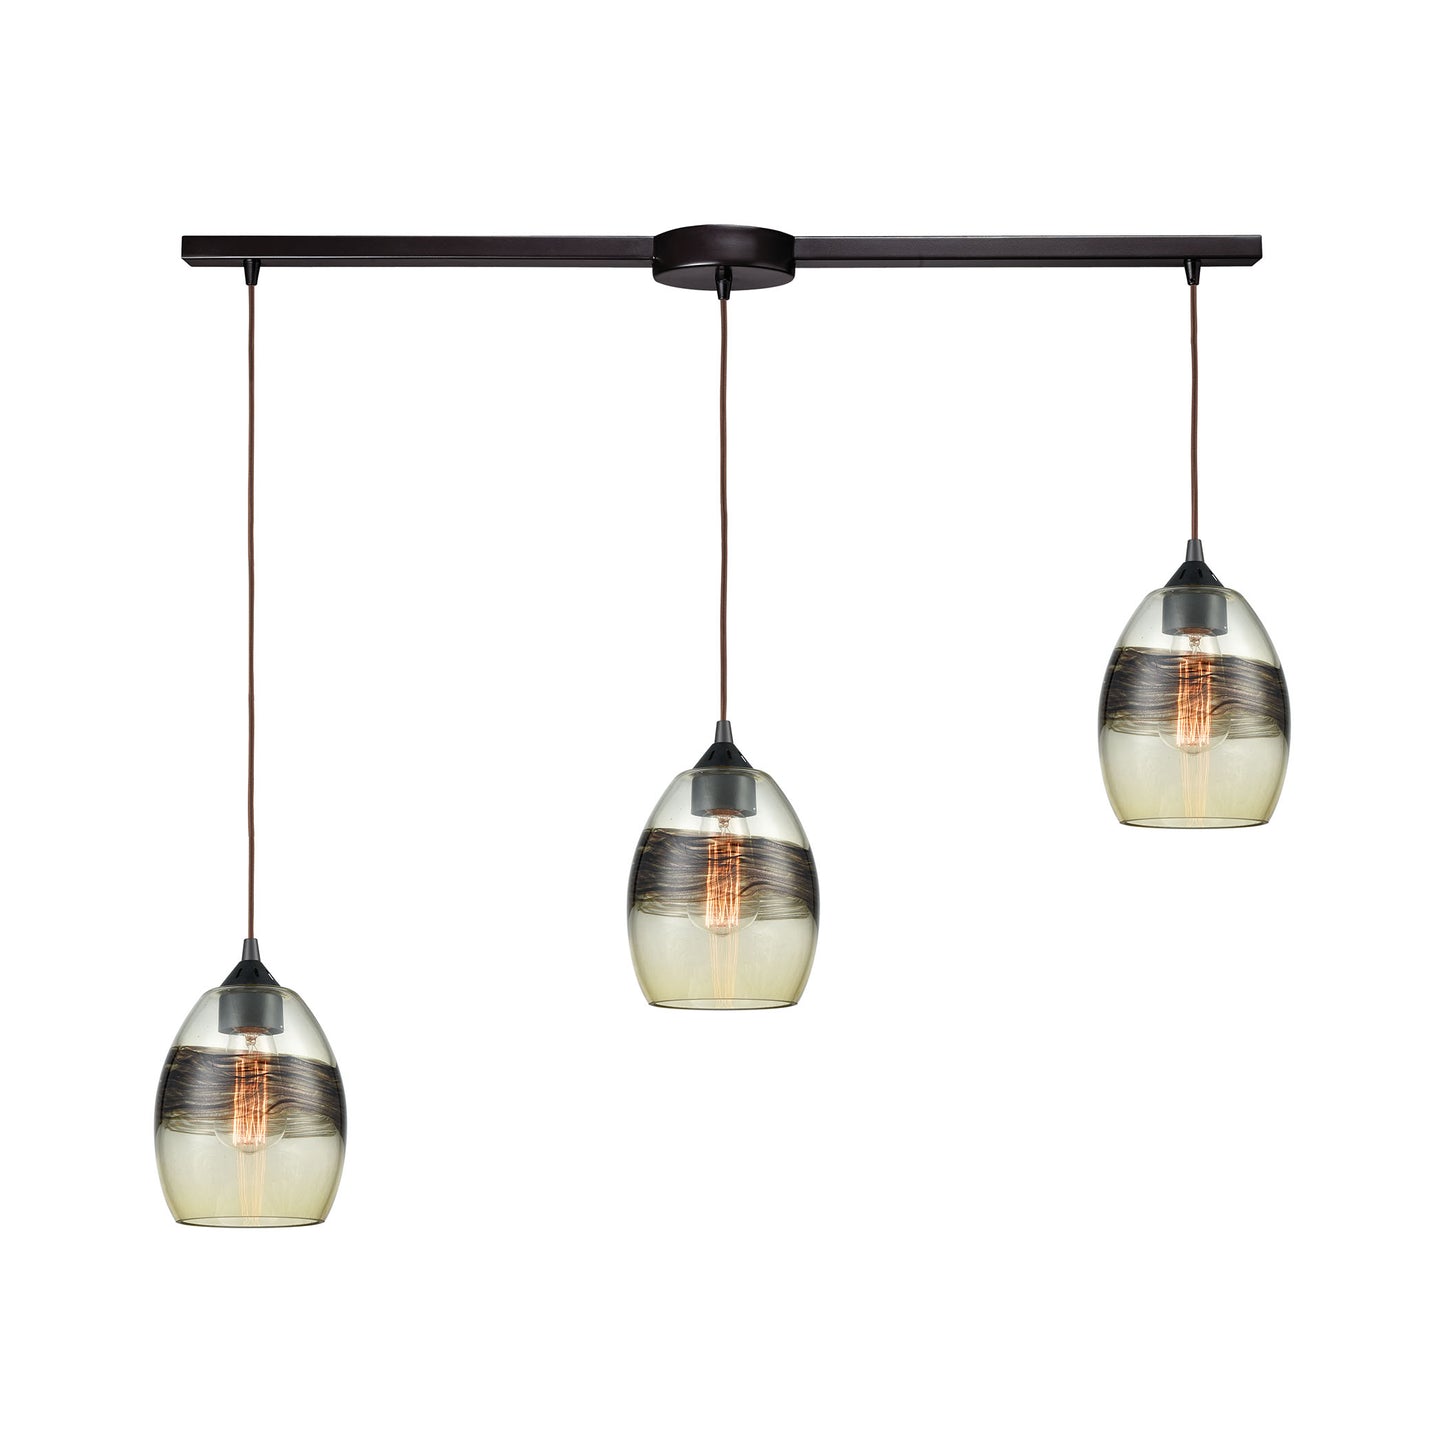 ELK Lighting 25122/3L - Whisp 38" Wide 3-Light Linear Mini Pendant Fixture in Oil Rubbed Bronze with